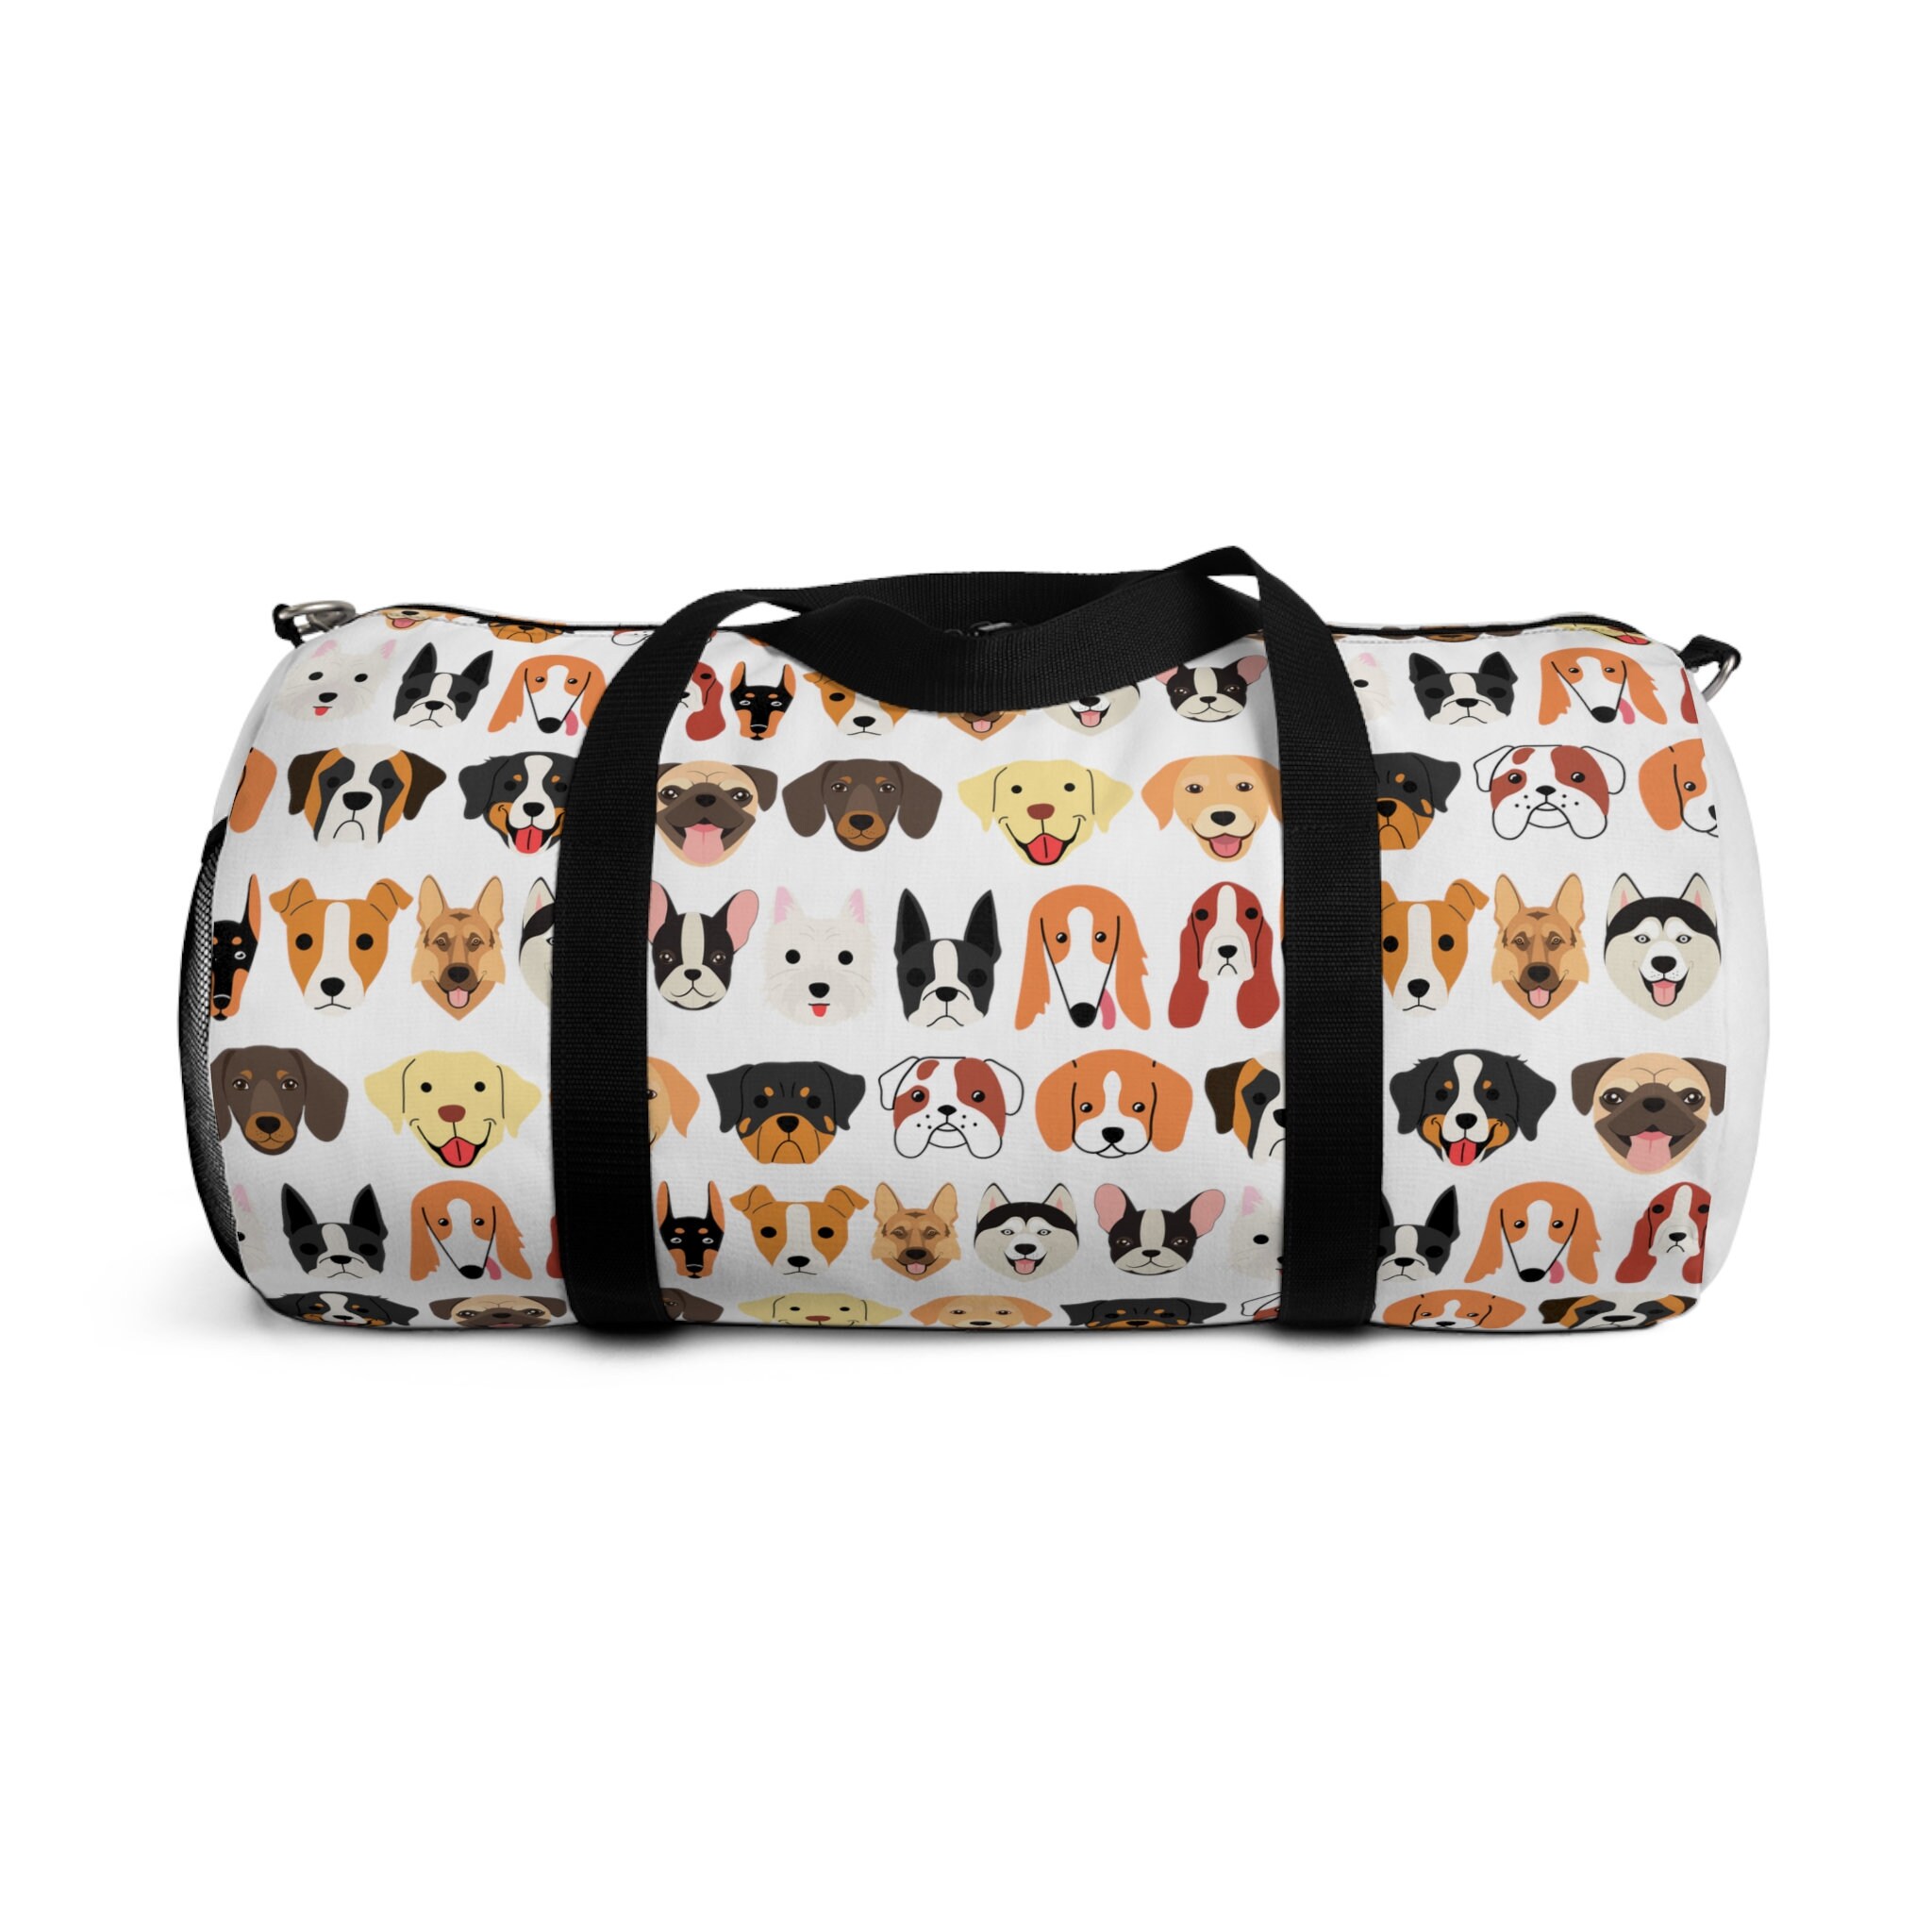  Bone Dog Paws Travel Bag, Weekender Bags for Women Travel, Gym  Bag, Carry on Bags for Airplanes, Duffle Bag for Men Travel, Weekender Bag, Travel  Duffle Bag